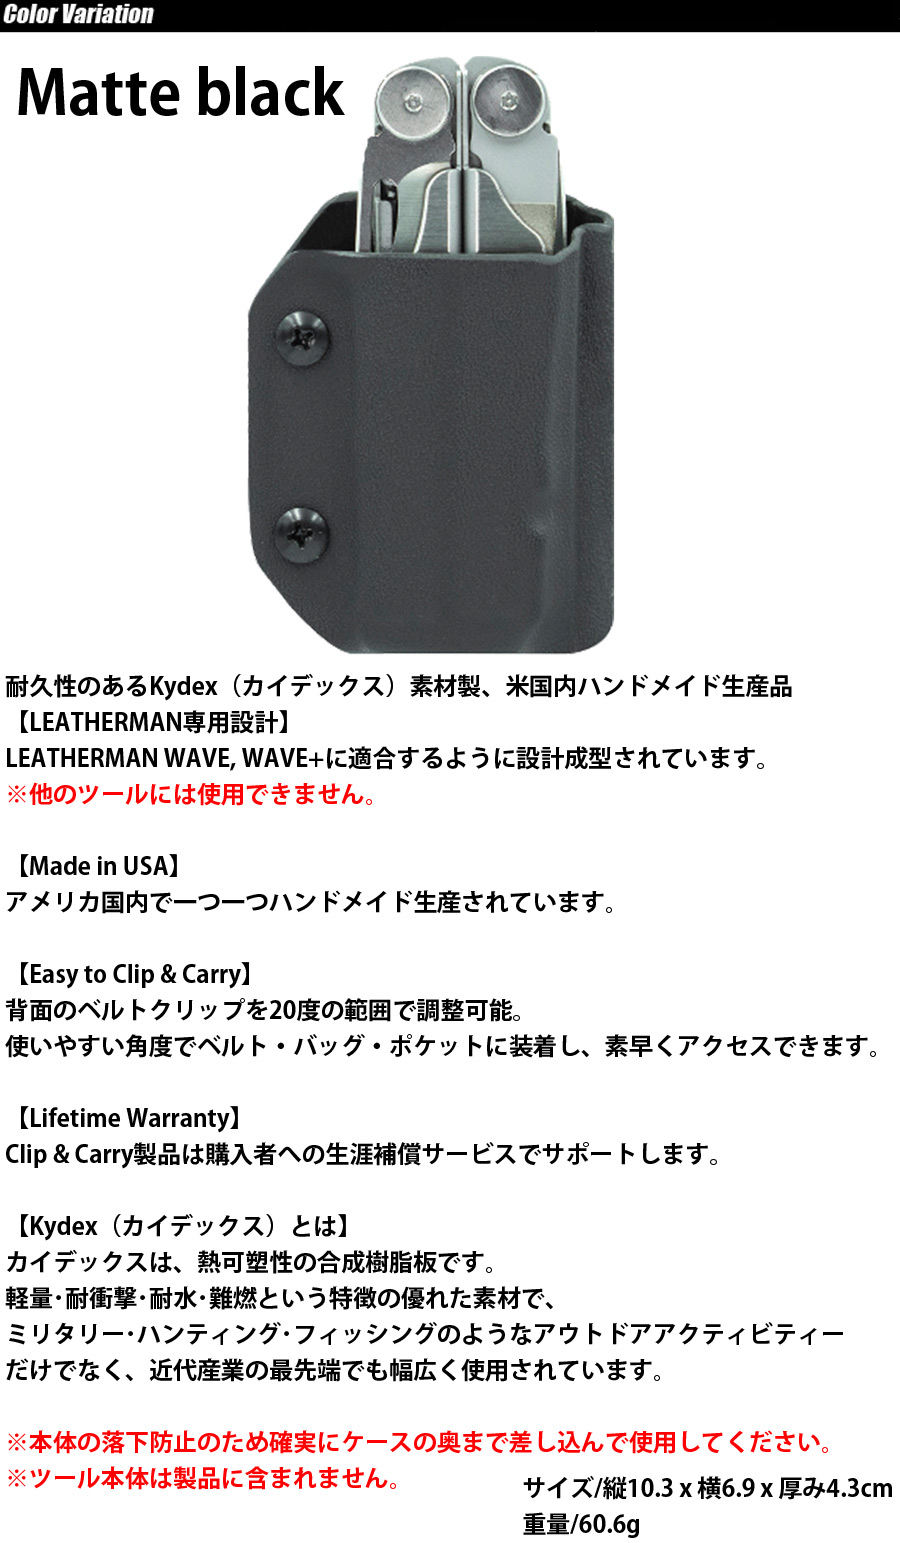 Case　LEATHERMAN（レザーマン）　CARRY　Kydex　LEATHERMAN（レザーマン）　SWAT　ミリタリーショップ専門店　WAVE　CLIP　For